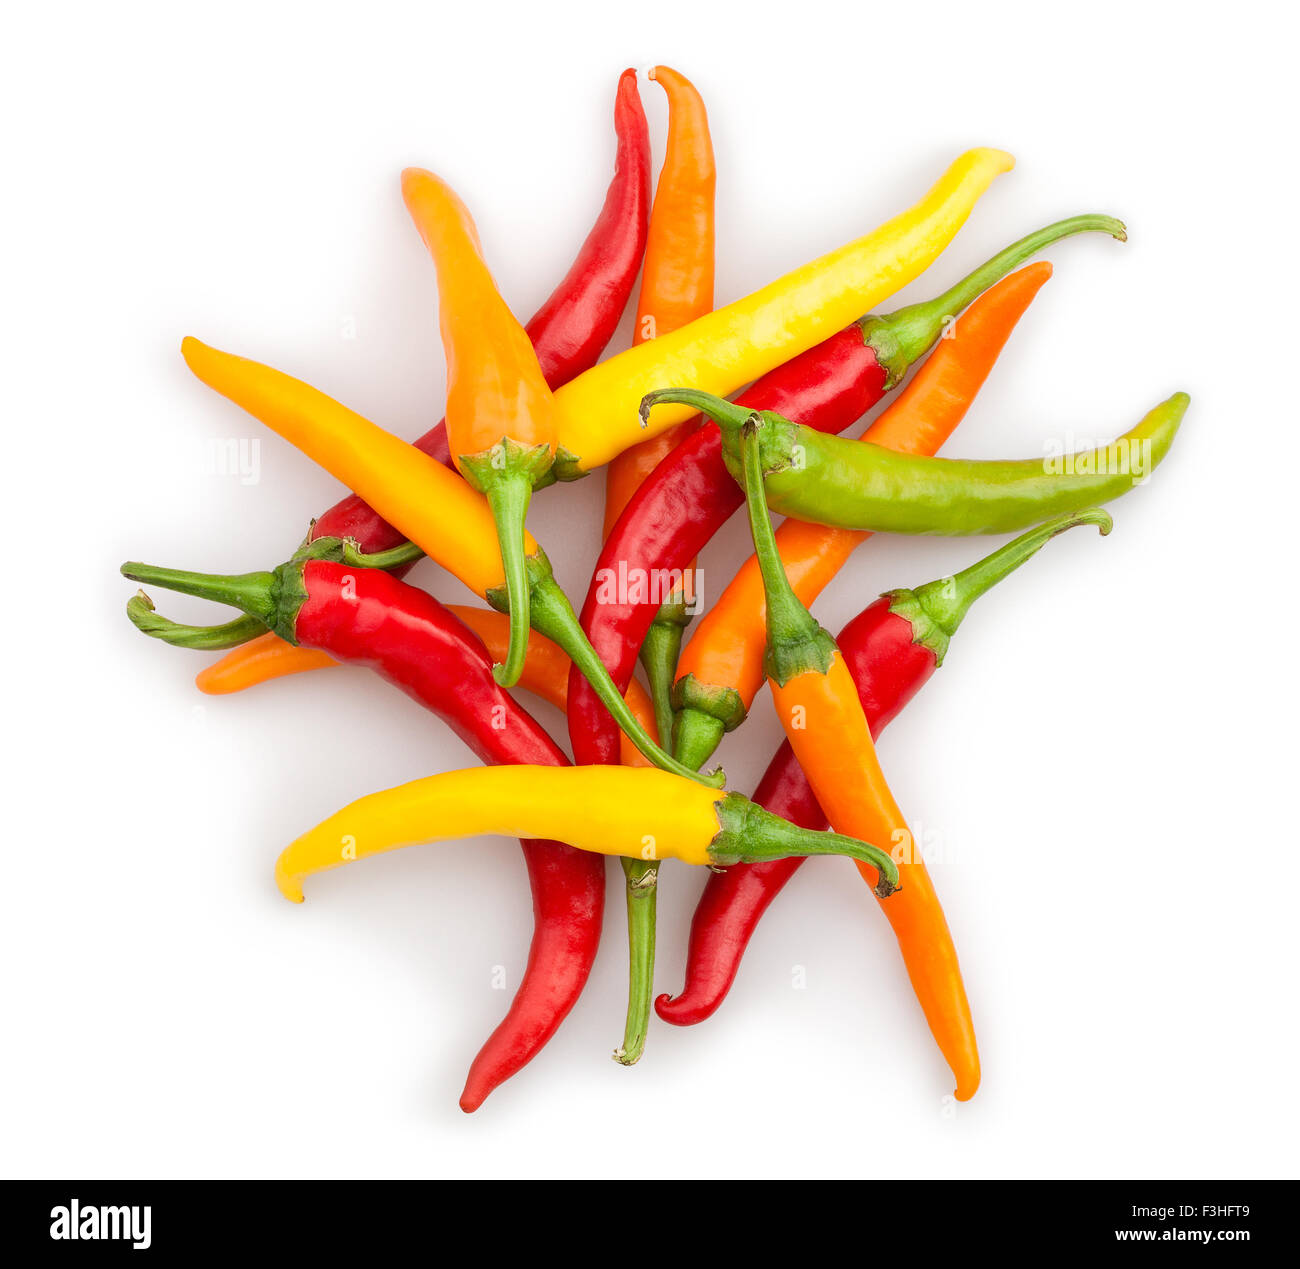 Chili Peppers isolated Banque D'Images